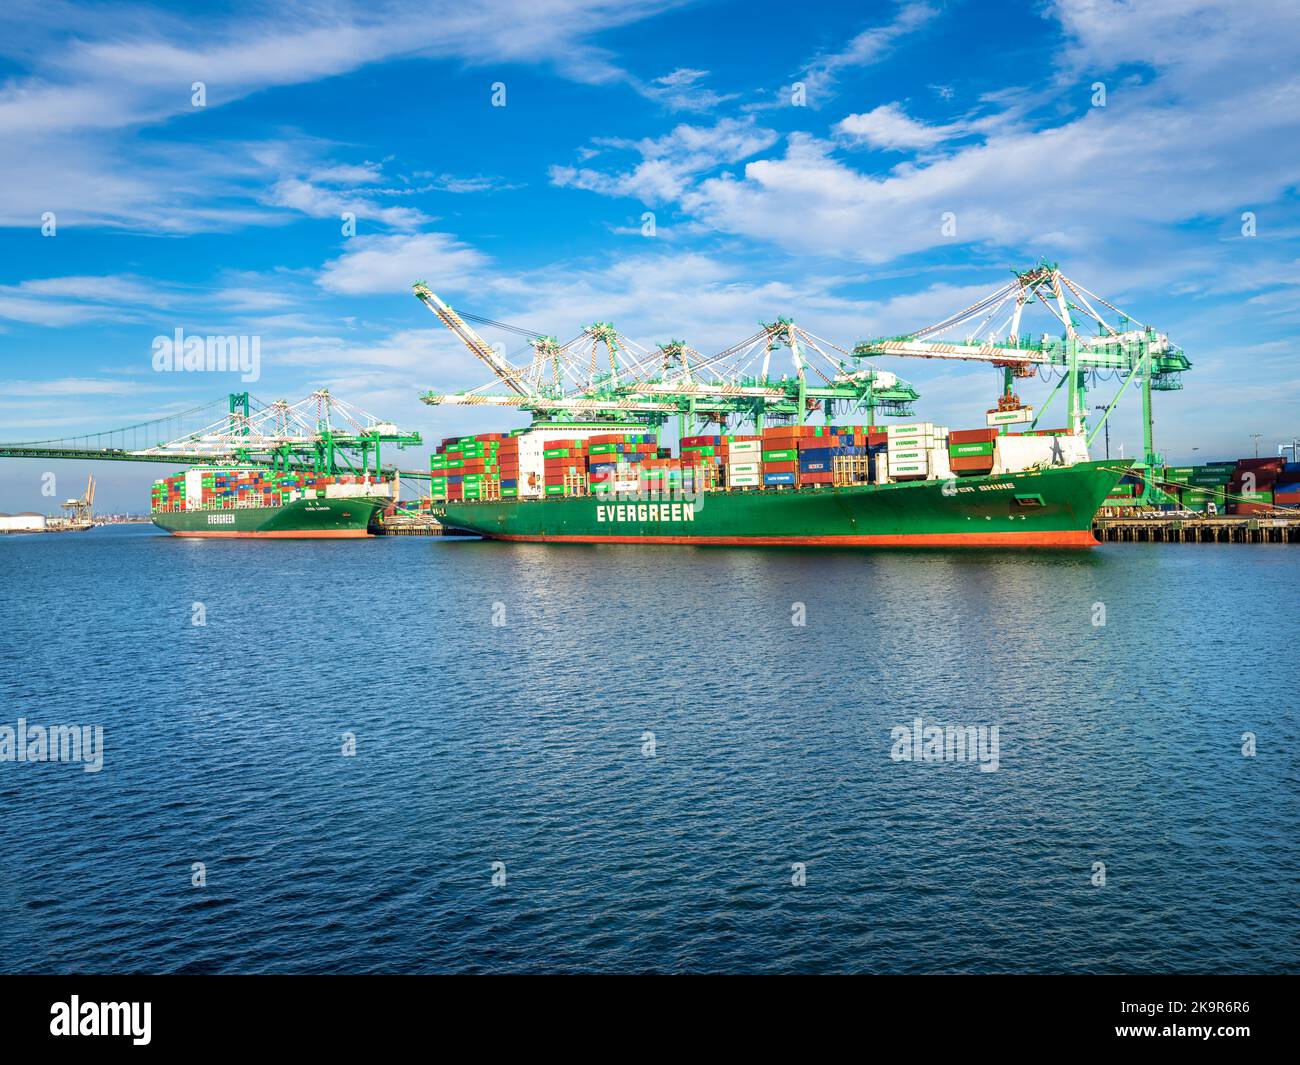 Los Angeles, CA, USA - November 17, 2017: Two Evergreen container ships -- Ever Lunar and Ever Shine -- load cargo at the Everport terminal, one of 25 Stock Photo